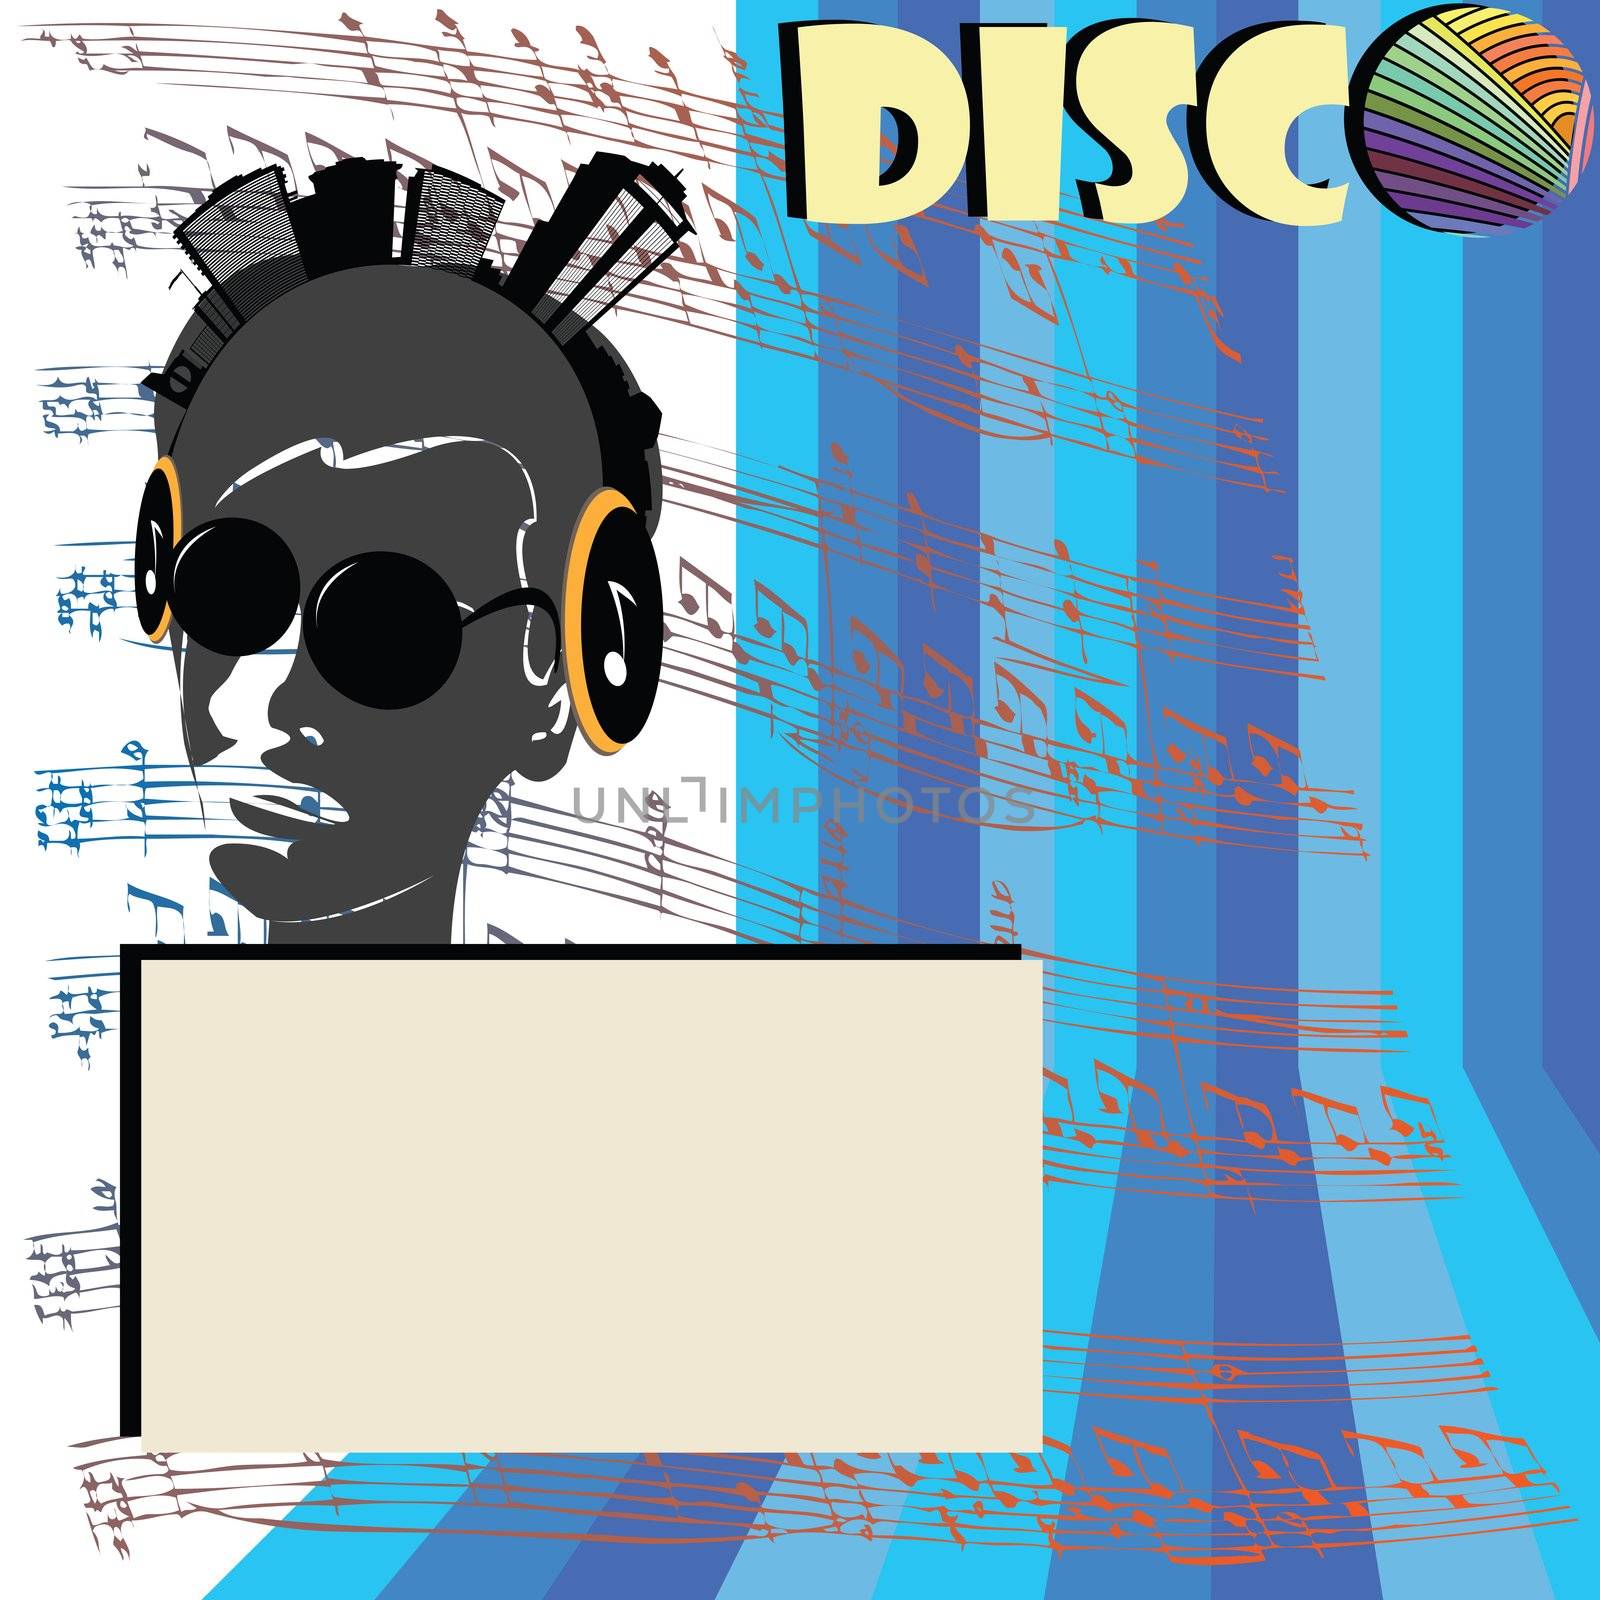 Discoteque flyer by Lirch